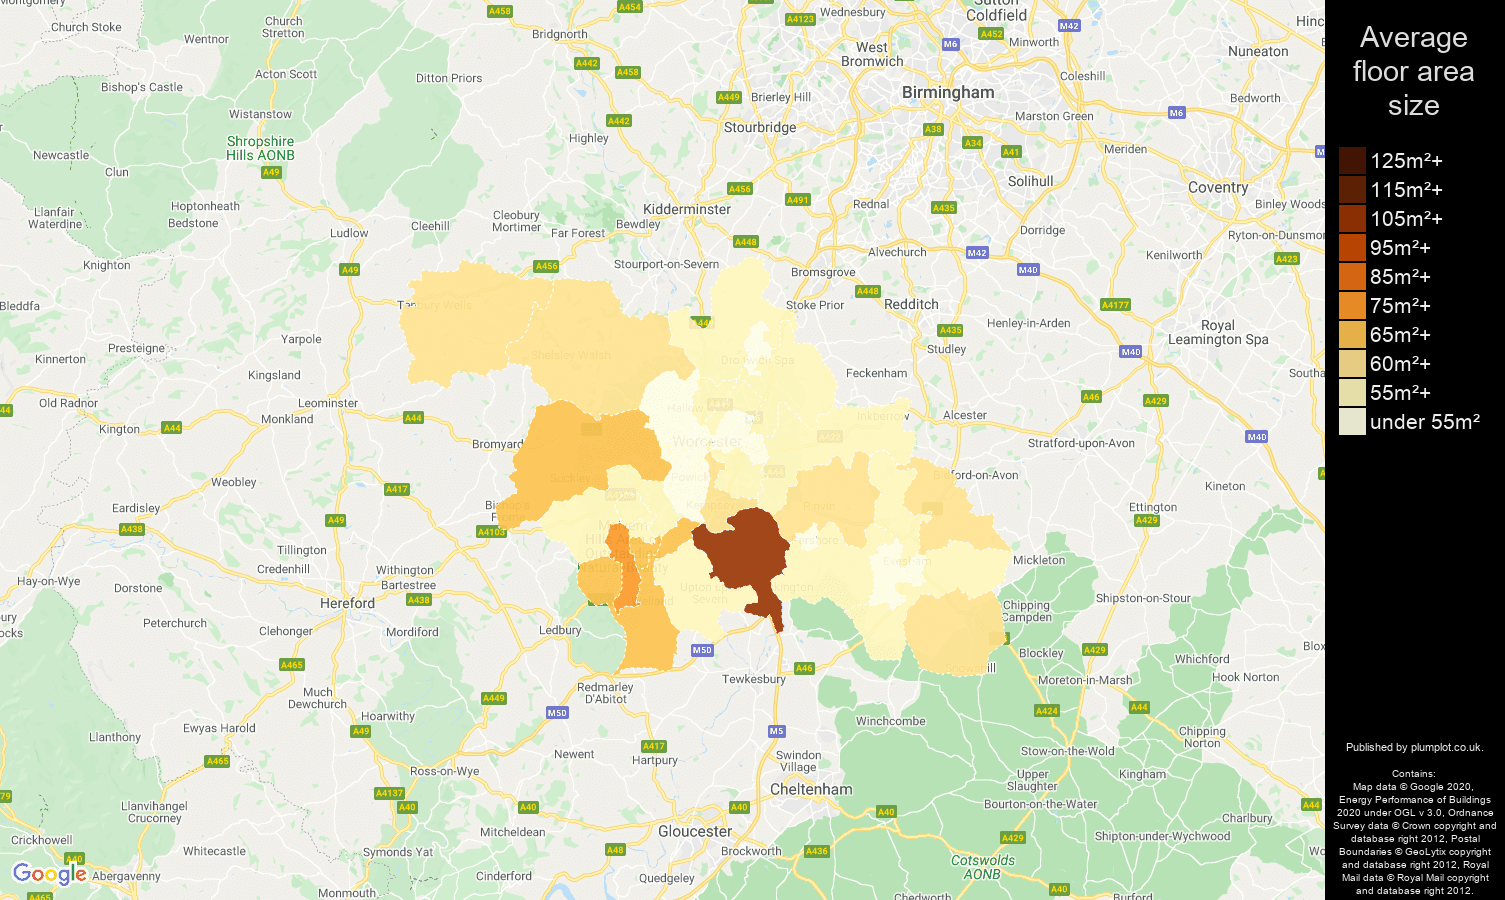 Worcester map of average floor area size of flats